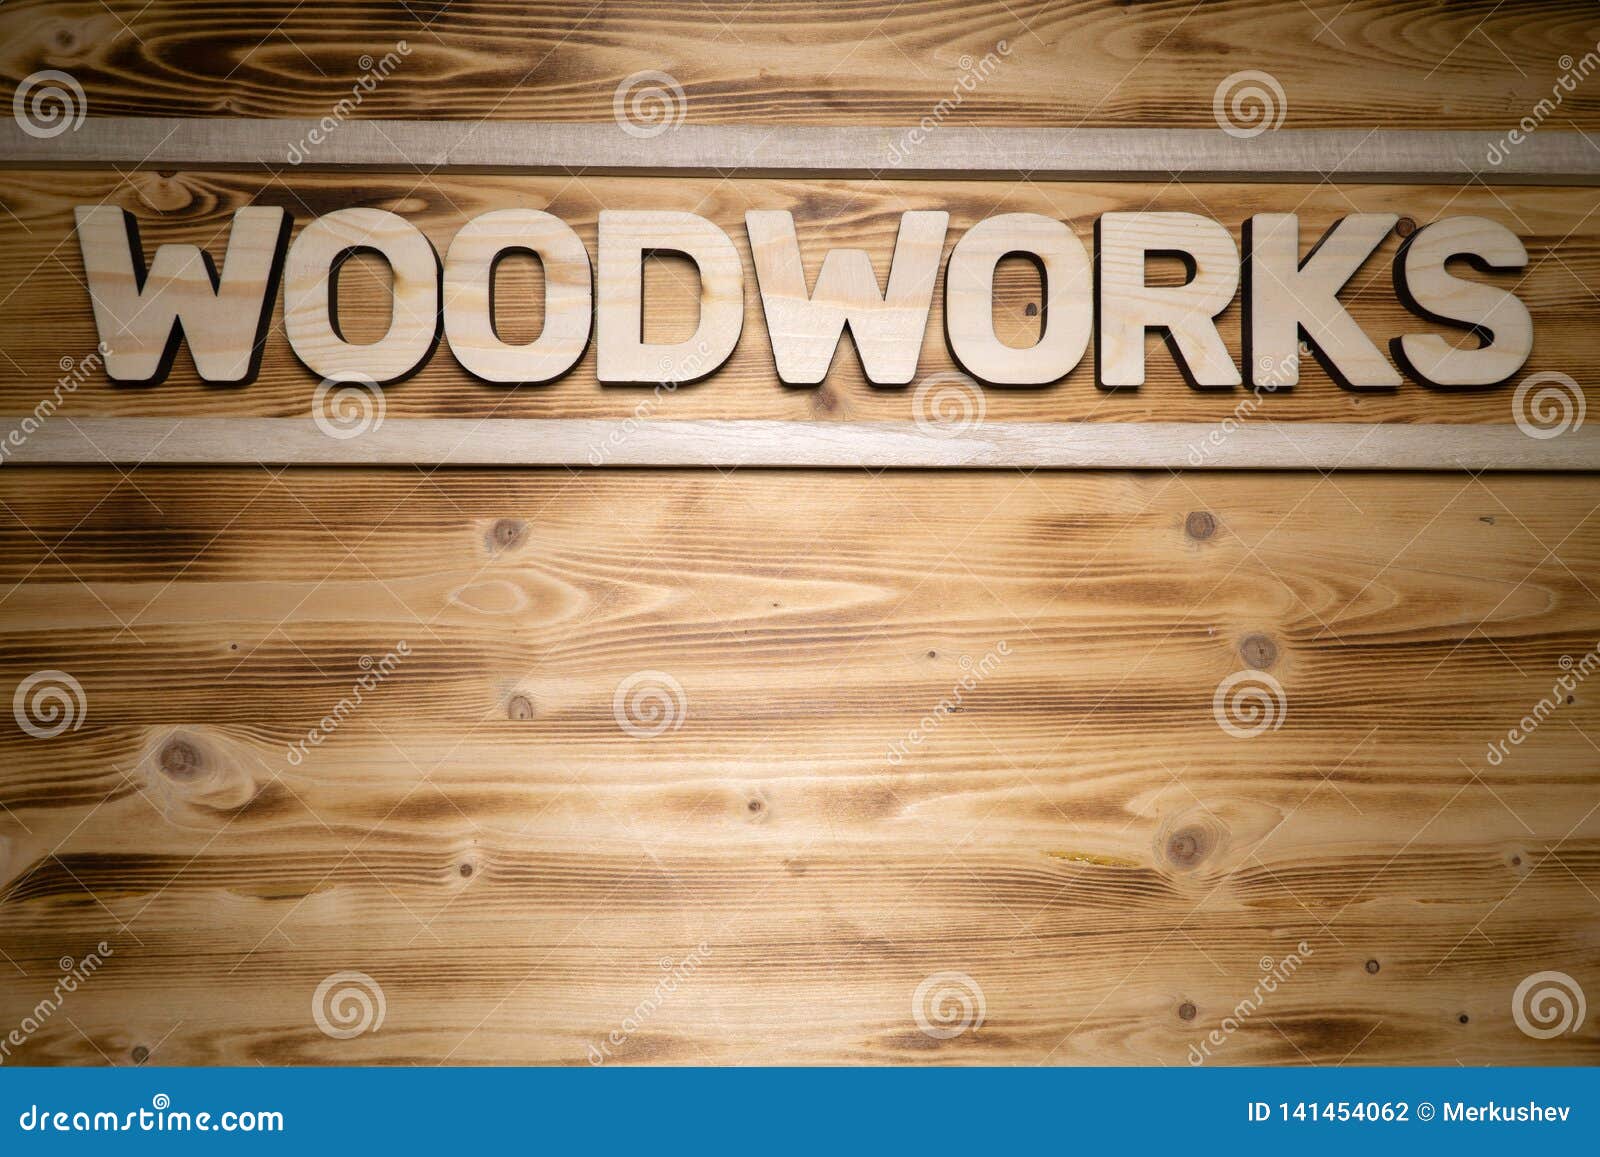 woodworks word made of wooden letters on wooden board